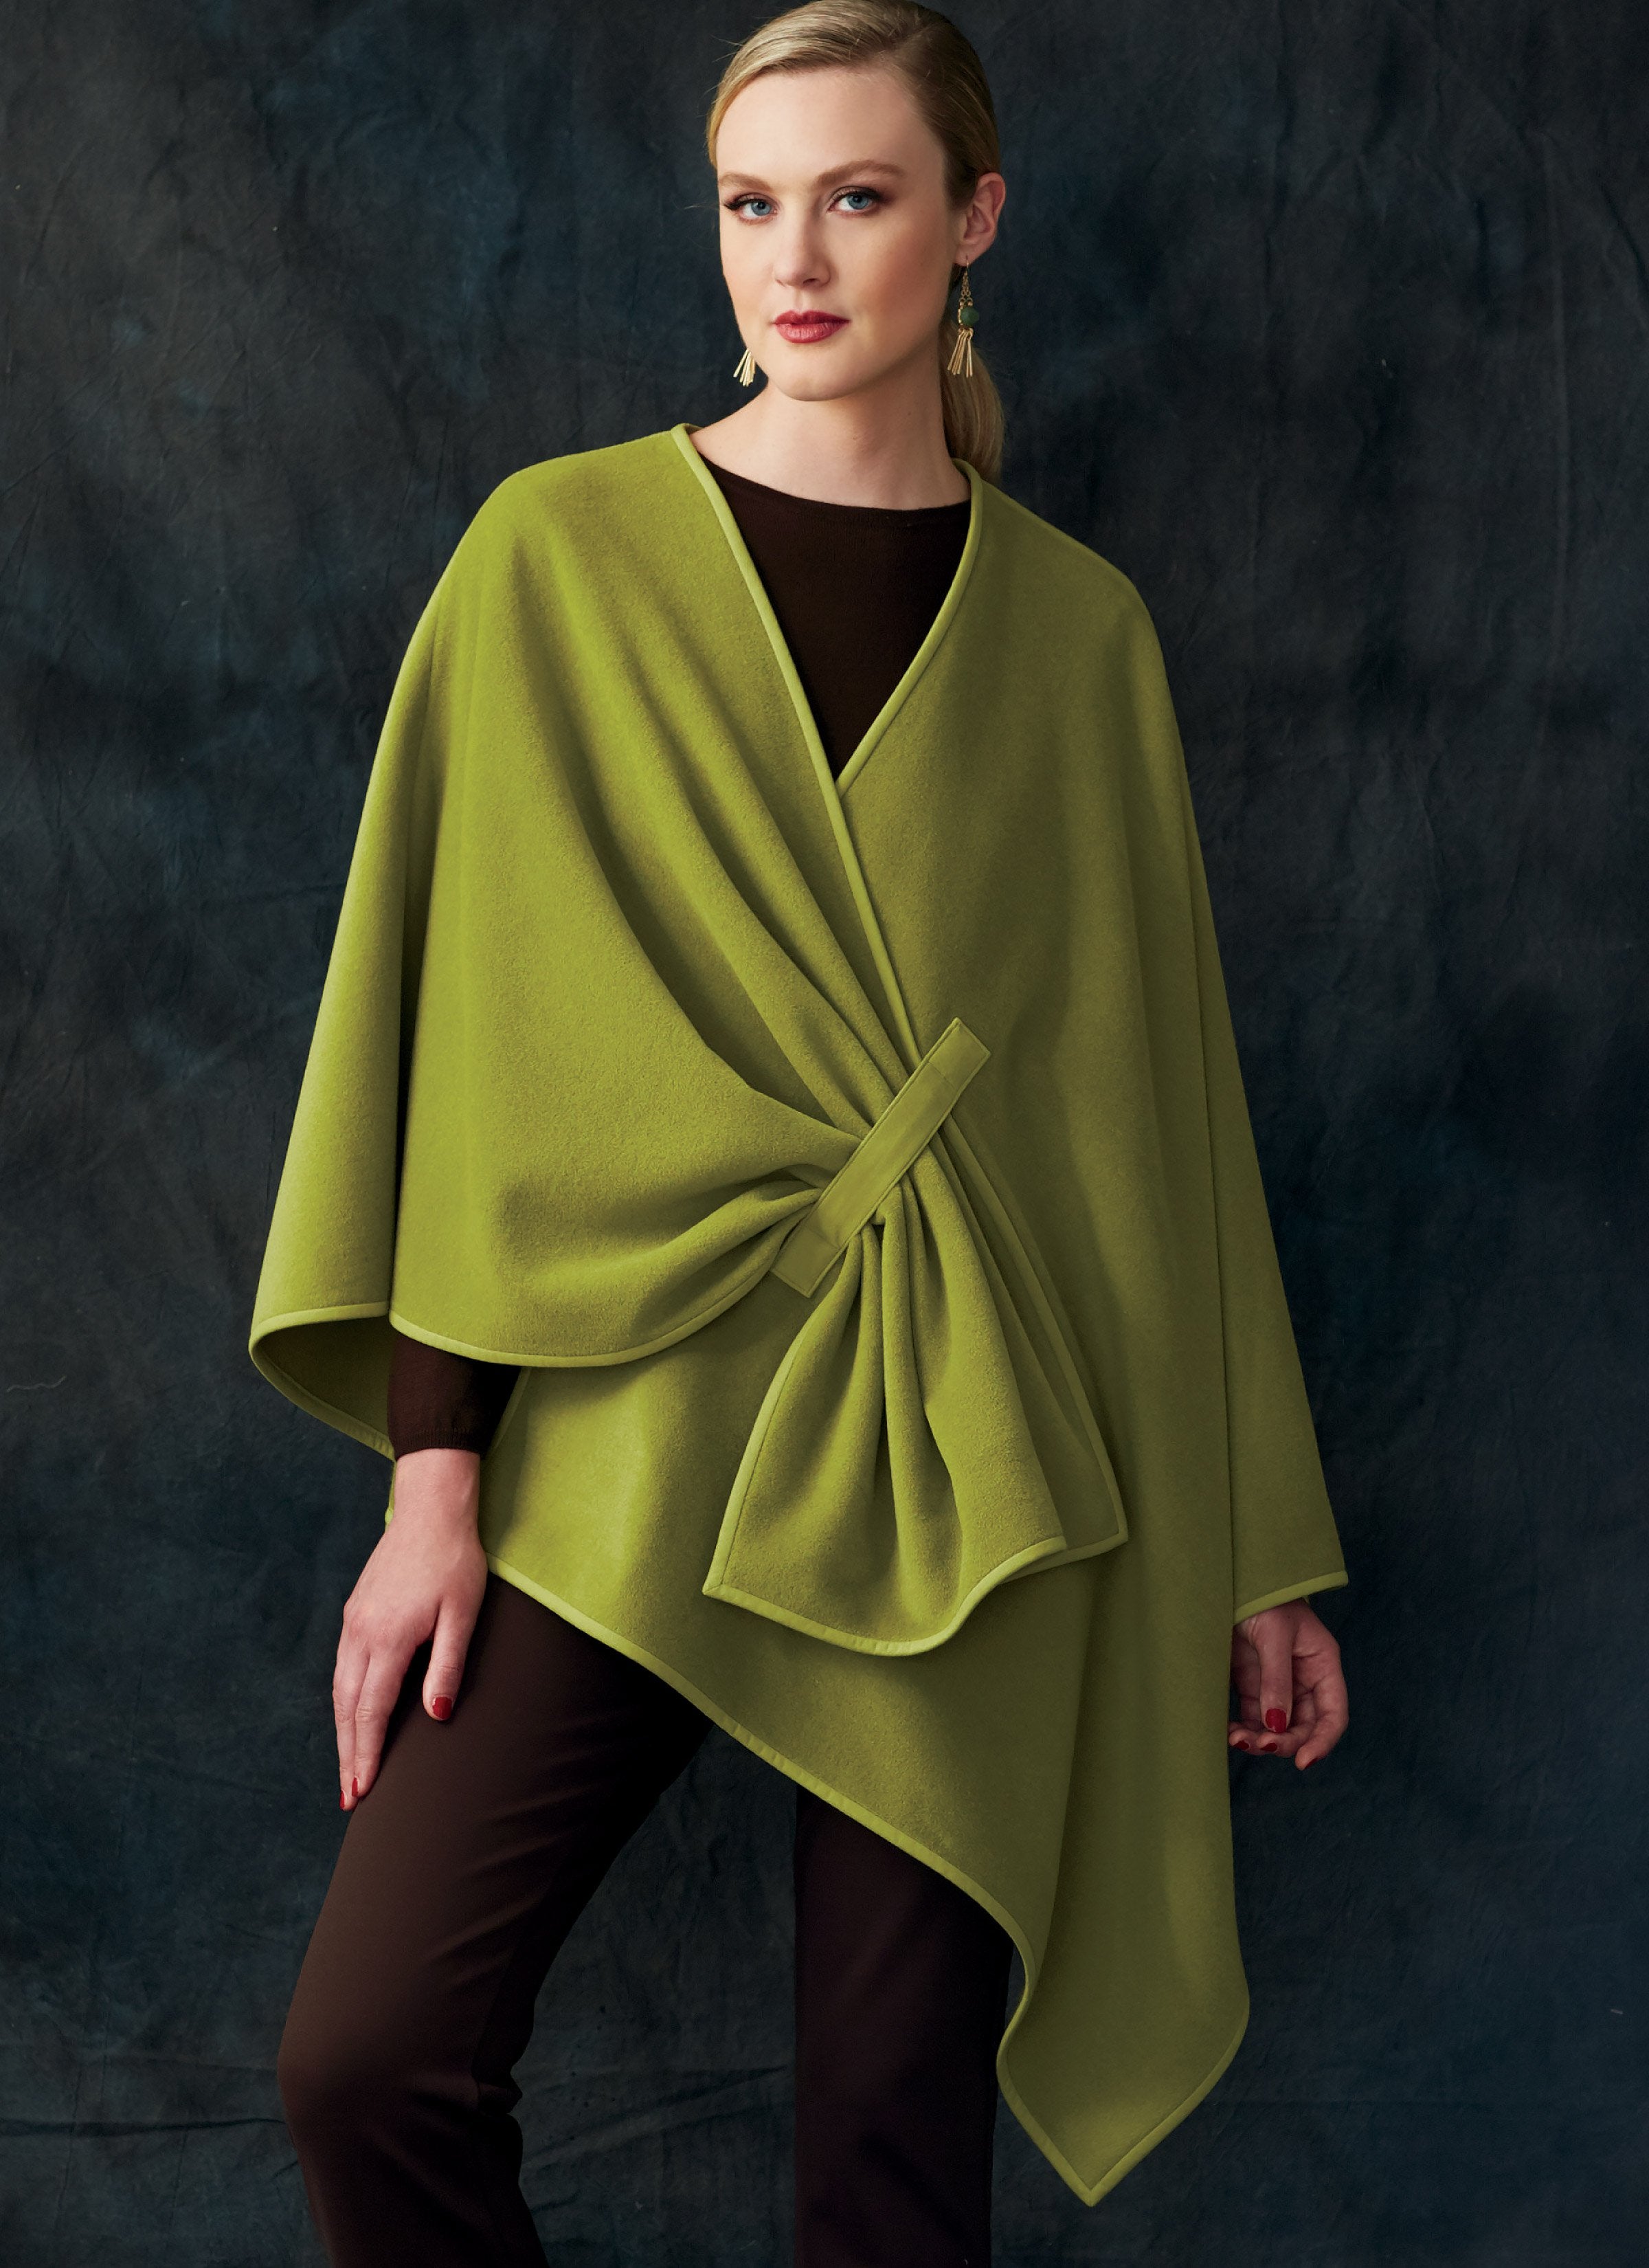 Vogue Pattern 9291 Misses' Wraps, Shrug, and Scarf Pattern | Kathryn Brenne from Jaycotts Sewing Supplies